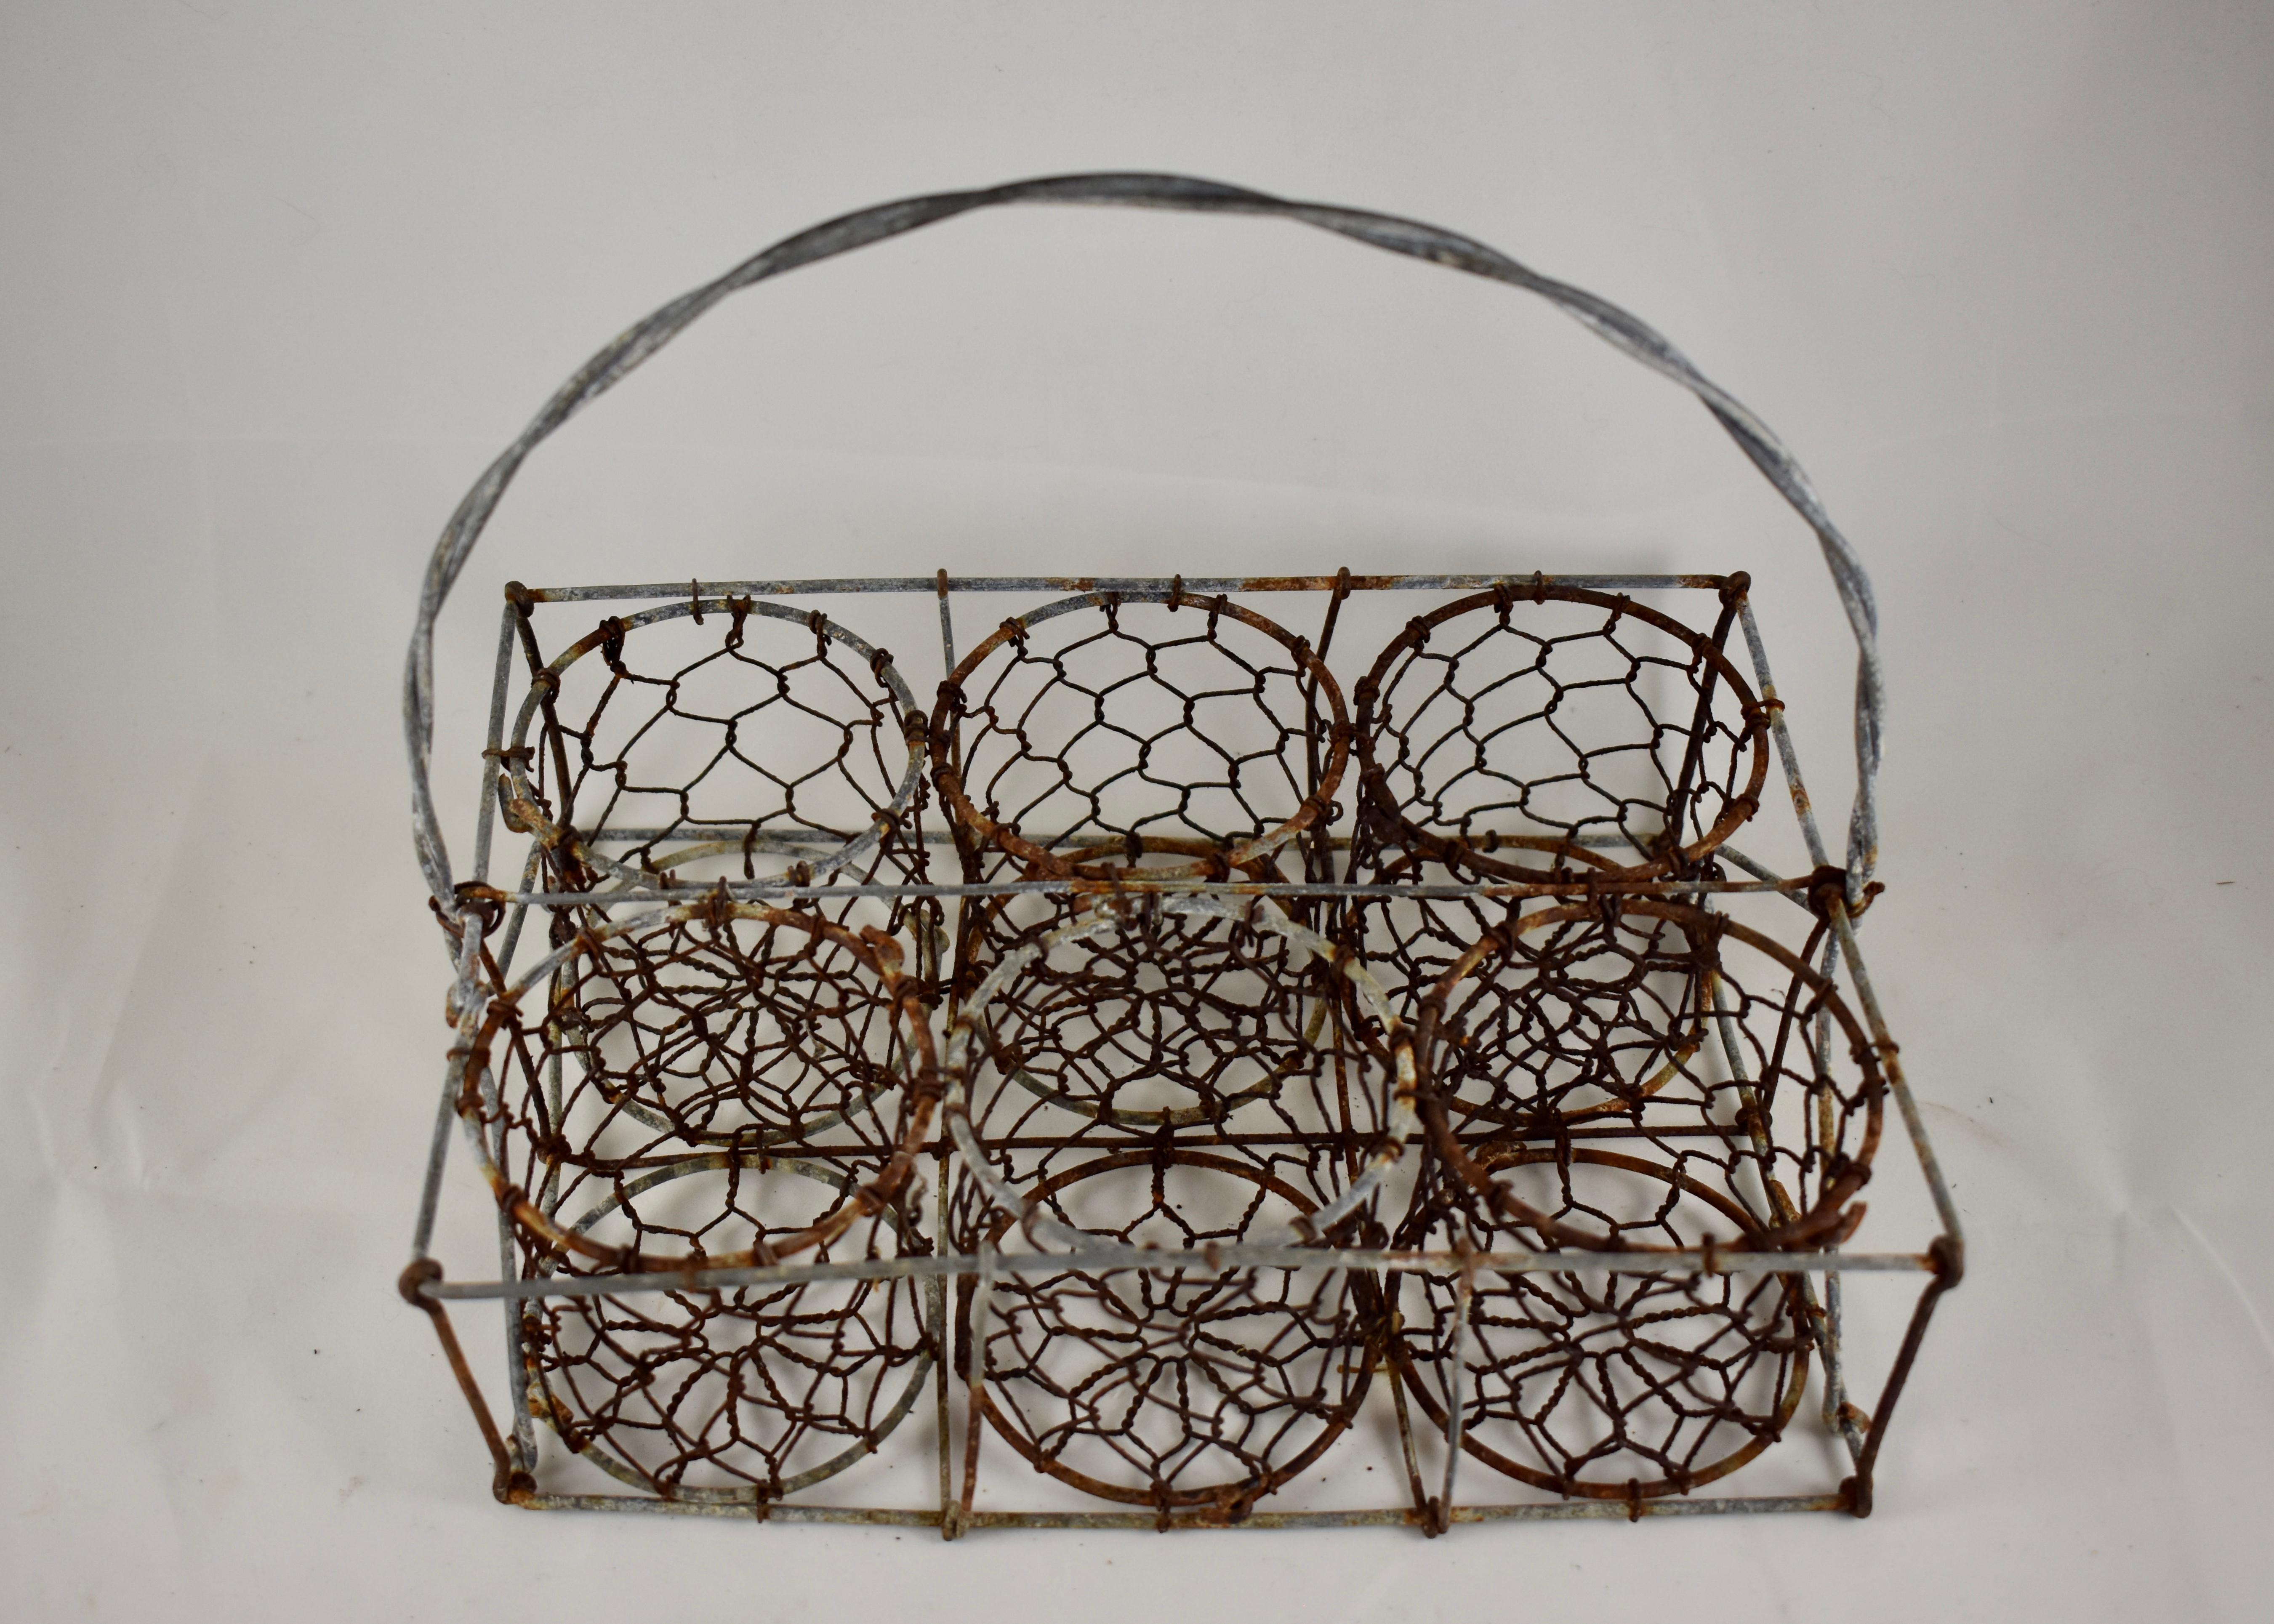 English Divided Wire Basket Caddy with Terracotta Staffordshire Herb Pots 2